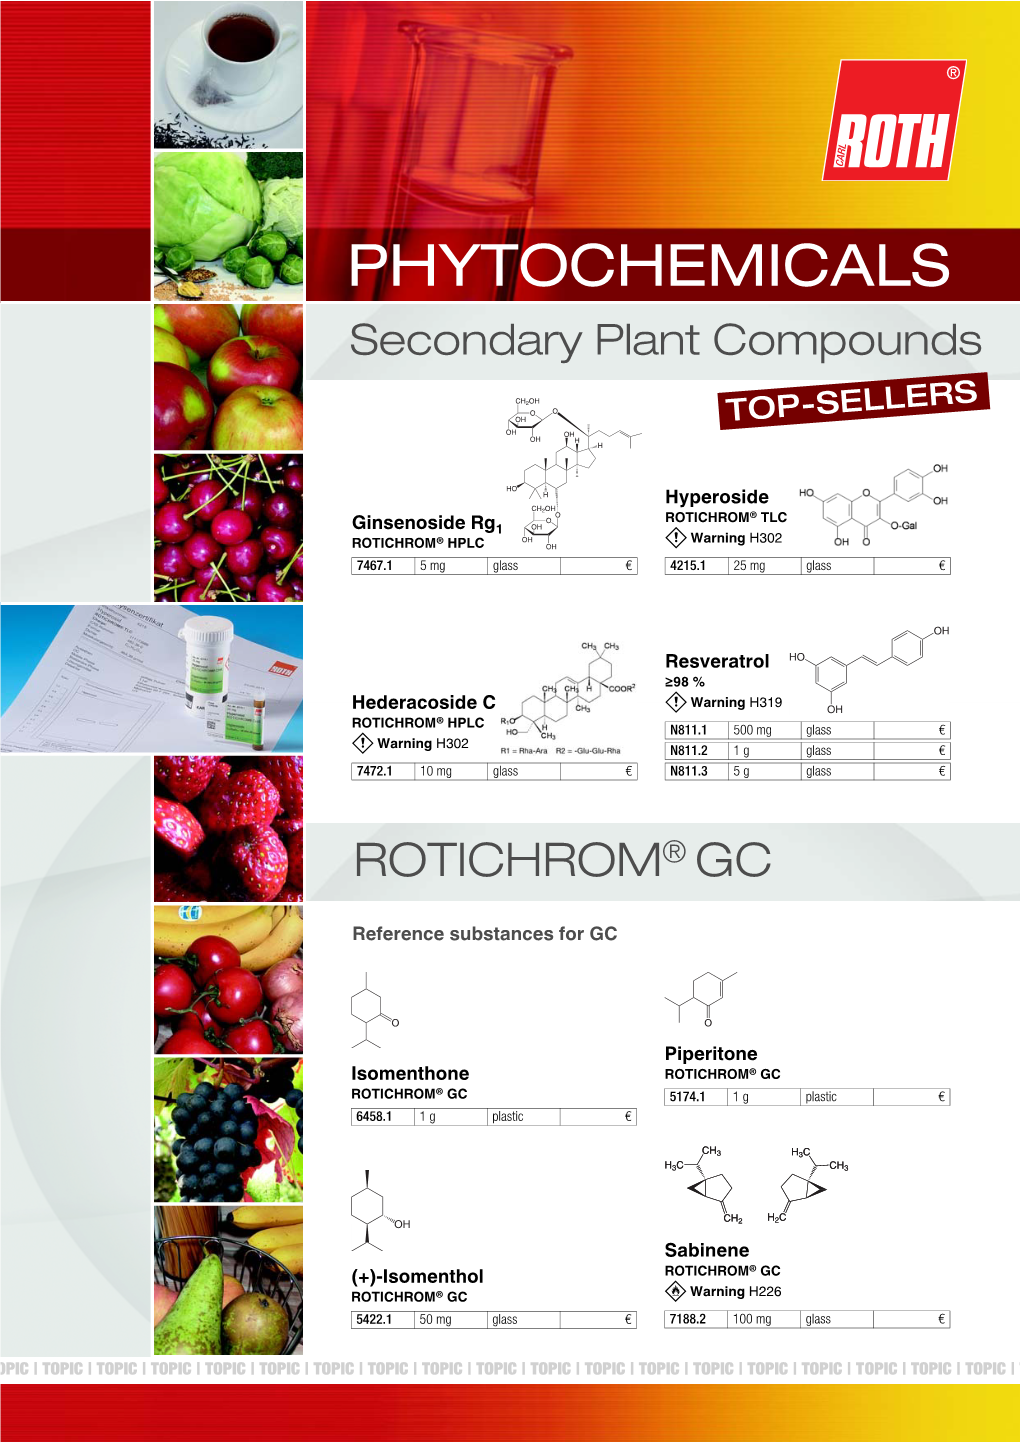 PHYTOCHEMICALS Secondary Plant Compounds